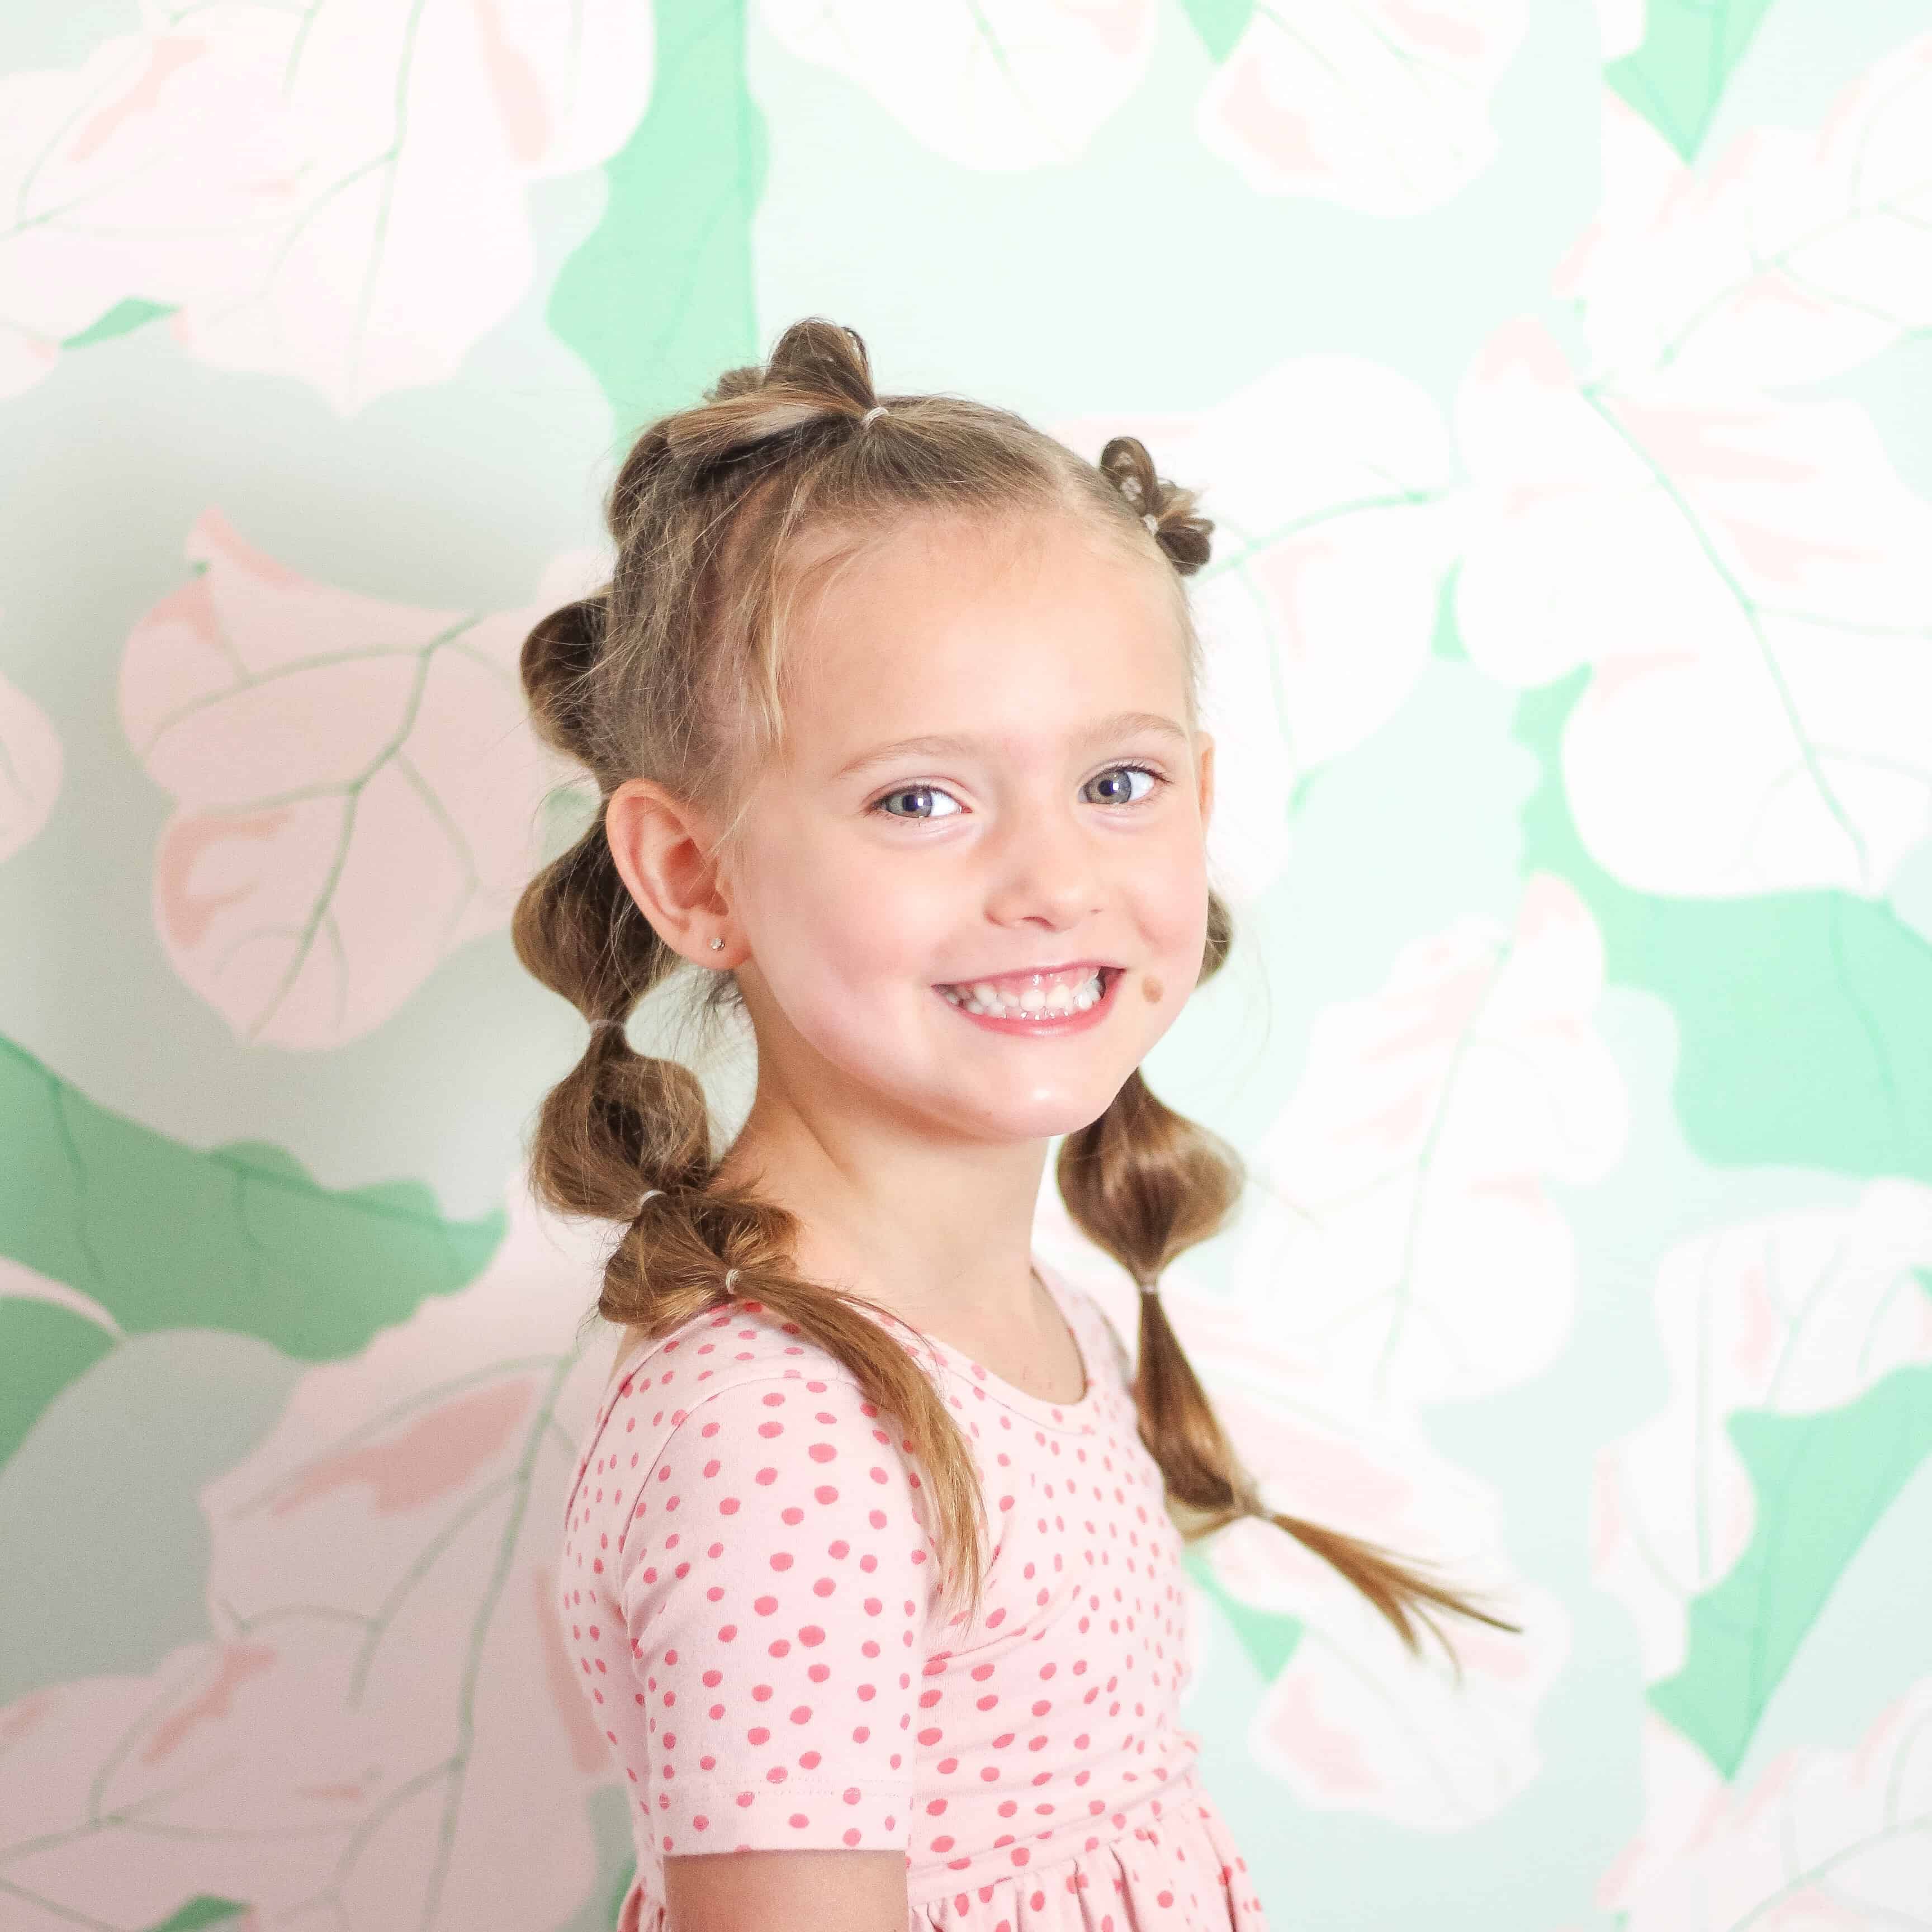 Little girl with bubble braid hair against green floral wall